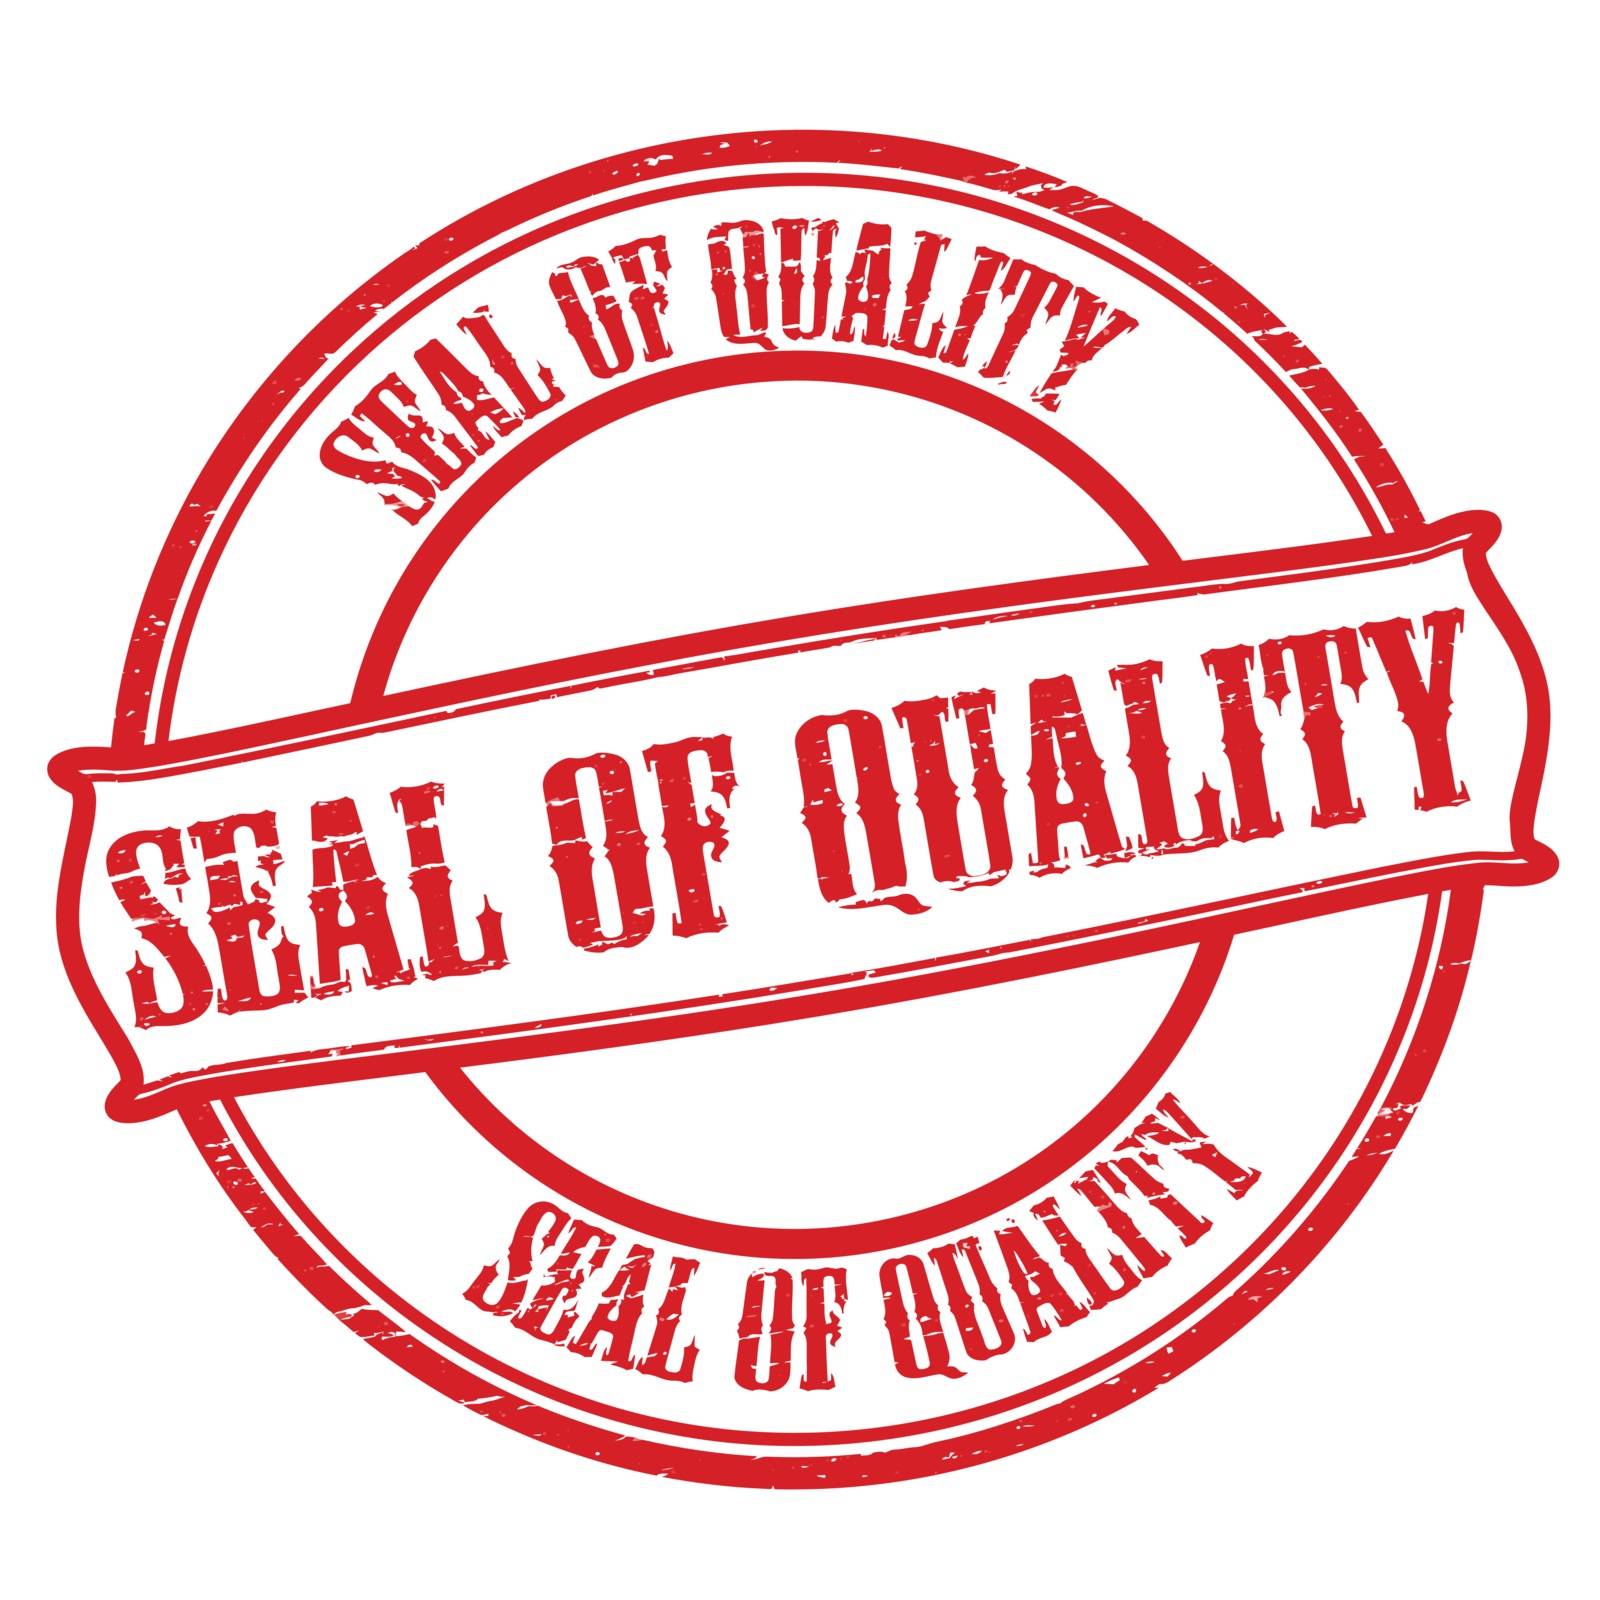 Seal of quality by carmenbobo